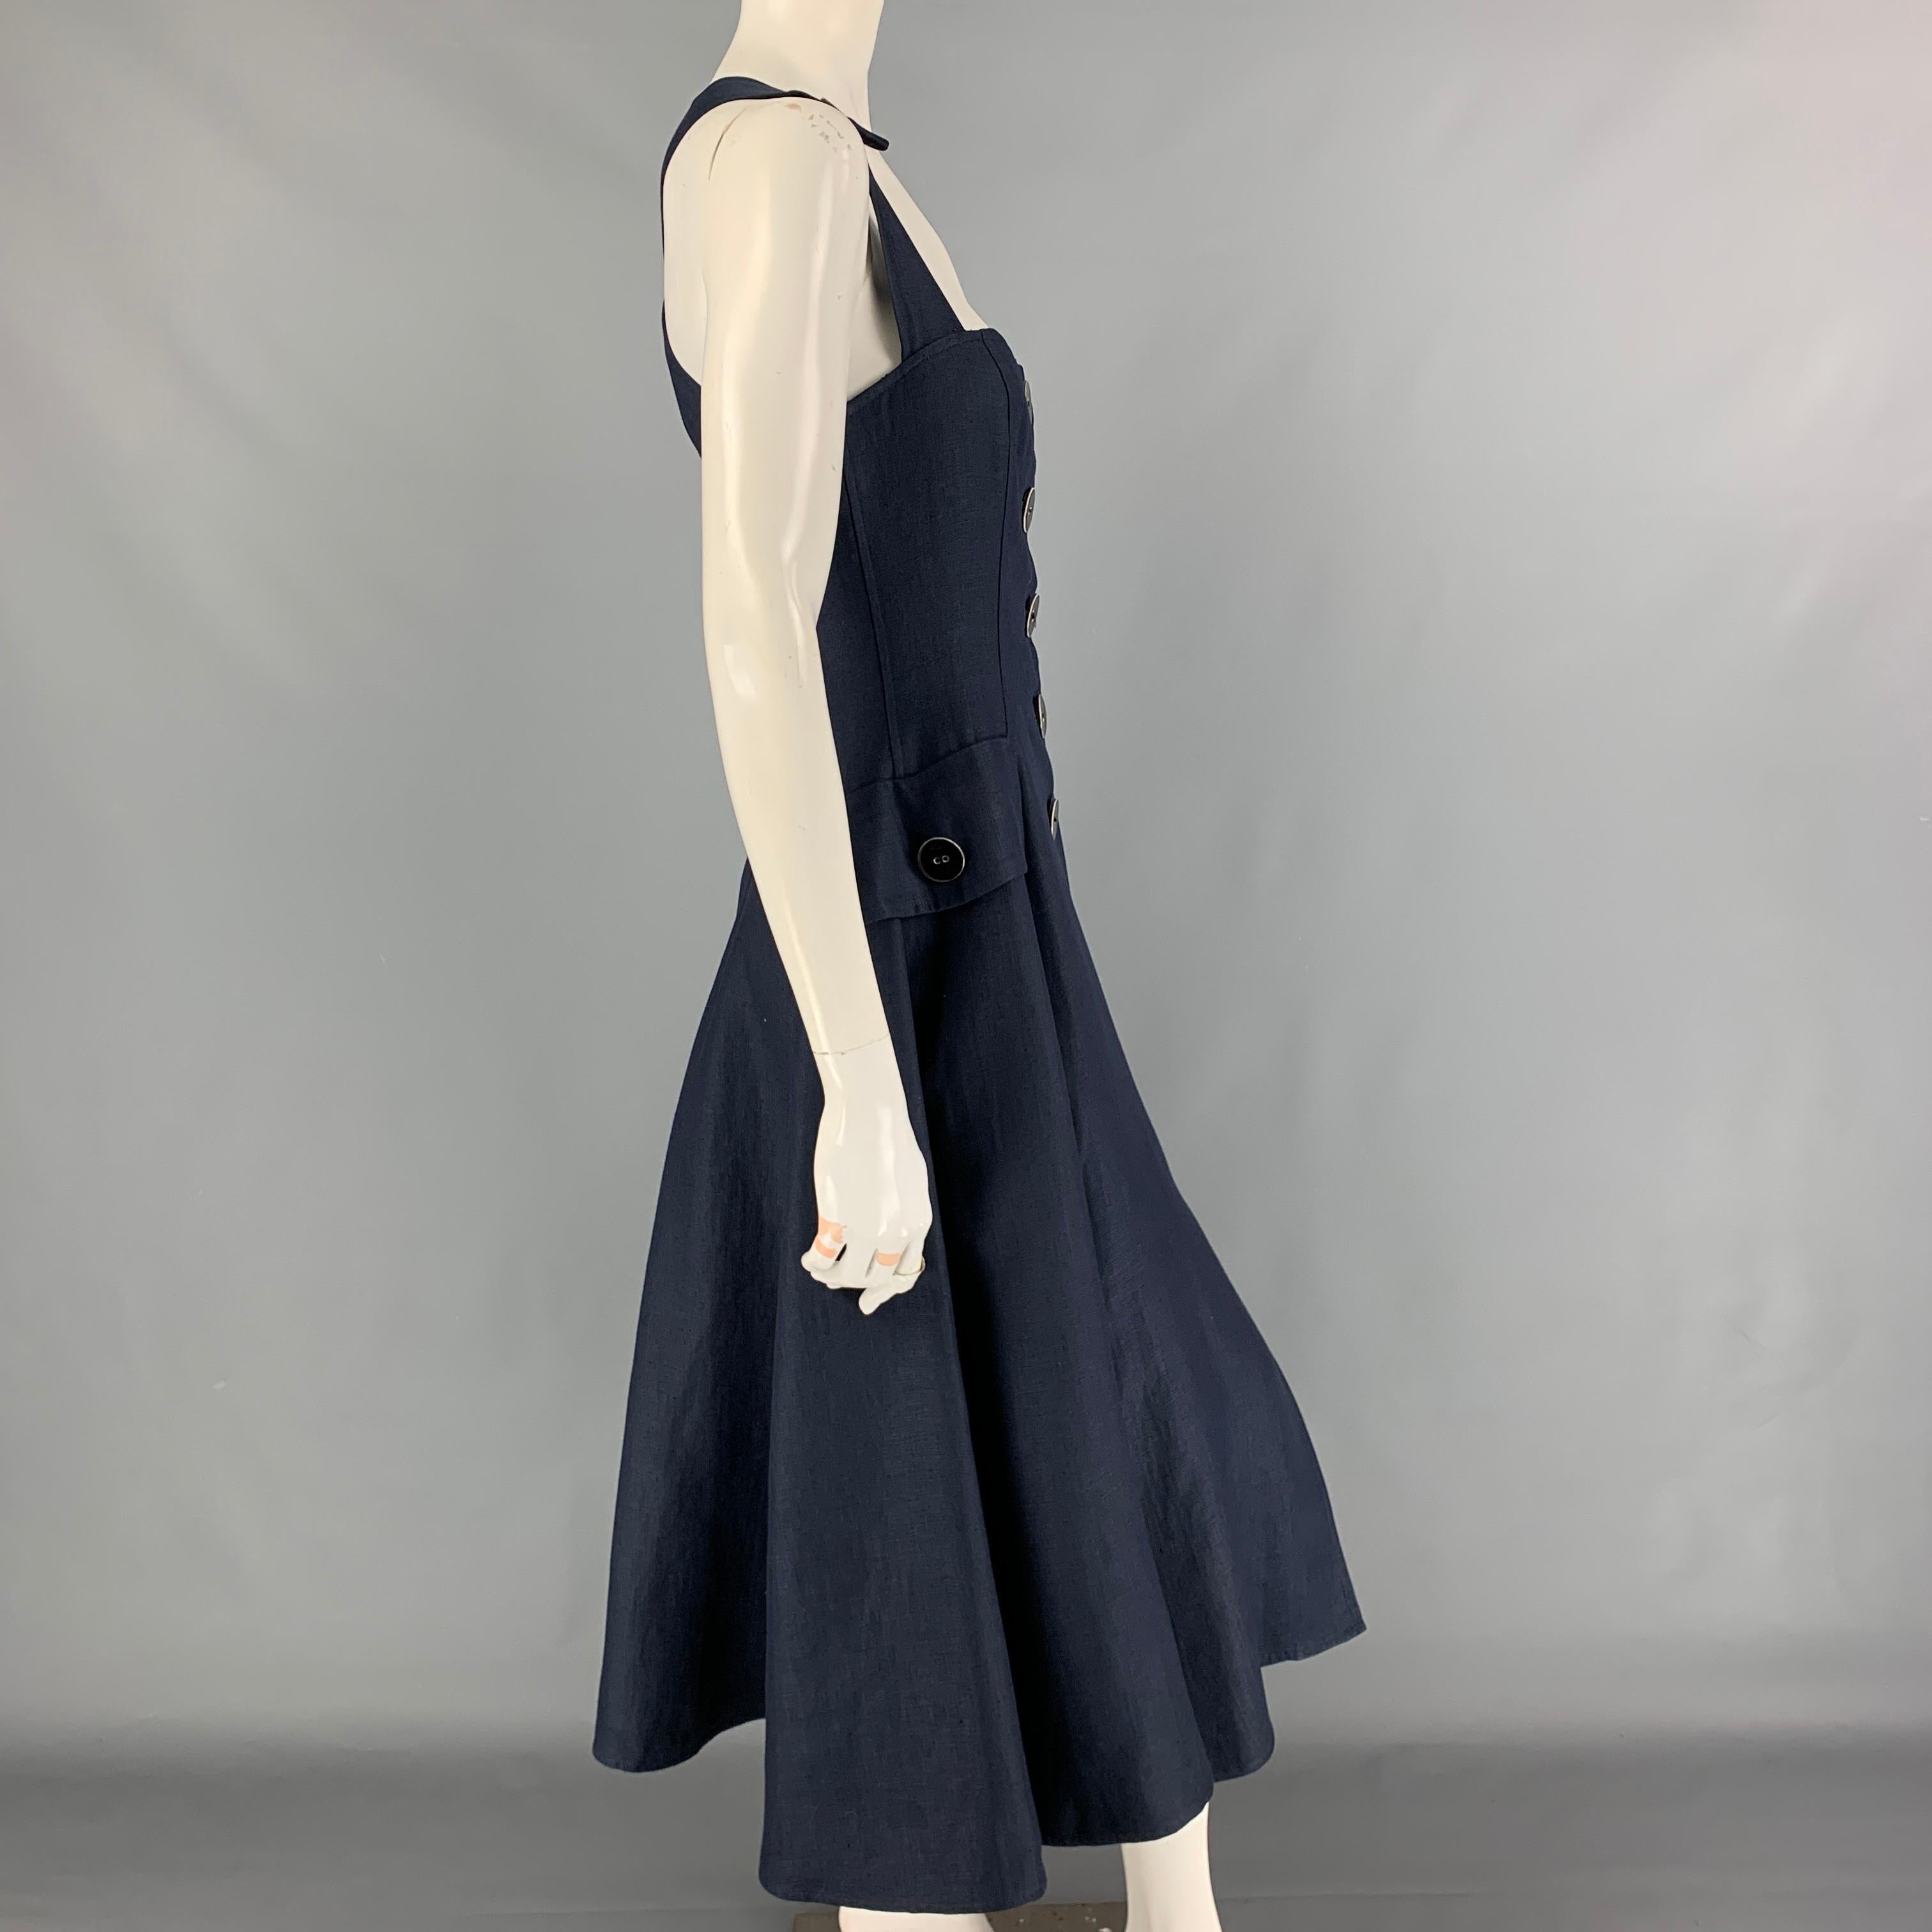 OSCAR DE LA RENTA dress comes in a navy material featuring an a-line style, flap pockets, back criss cross straps, and a large front buttoned closure. 

Very Good Pre-Owned Condition.
Marked: 8

Measurements:

Bust: 30 in.
Waist: 28 in.
Hip: 40